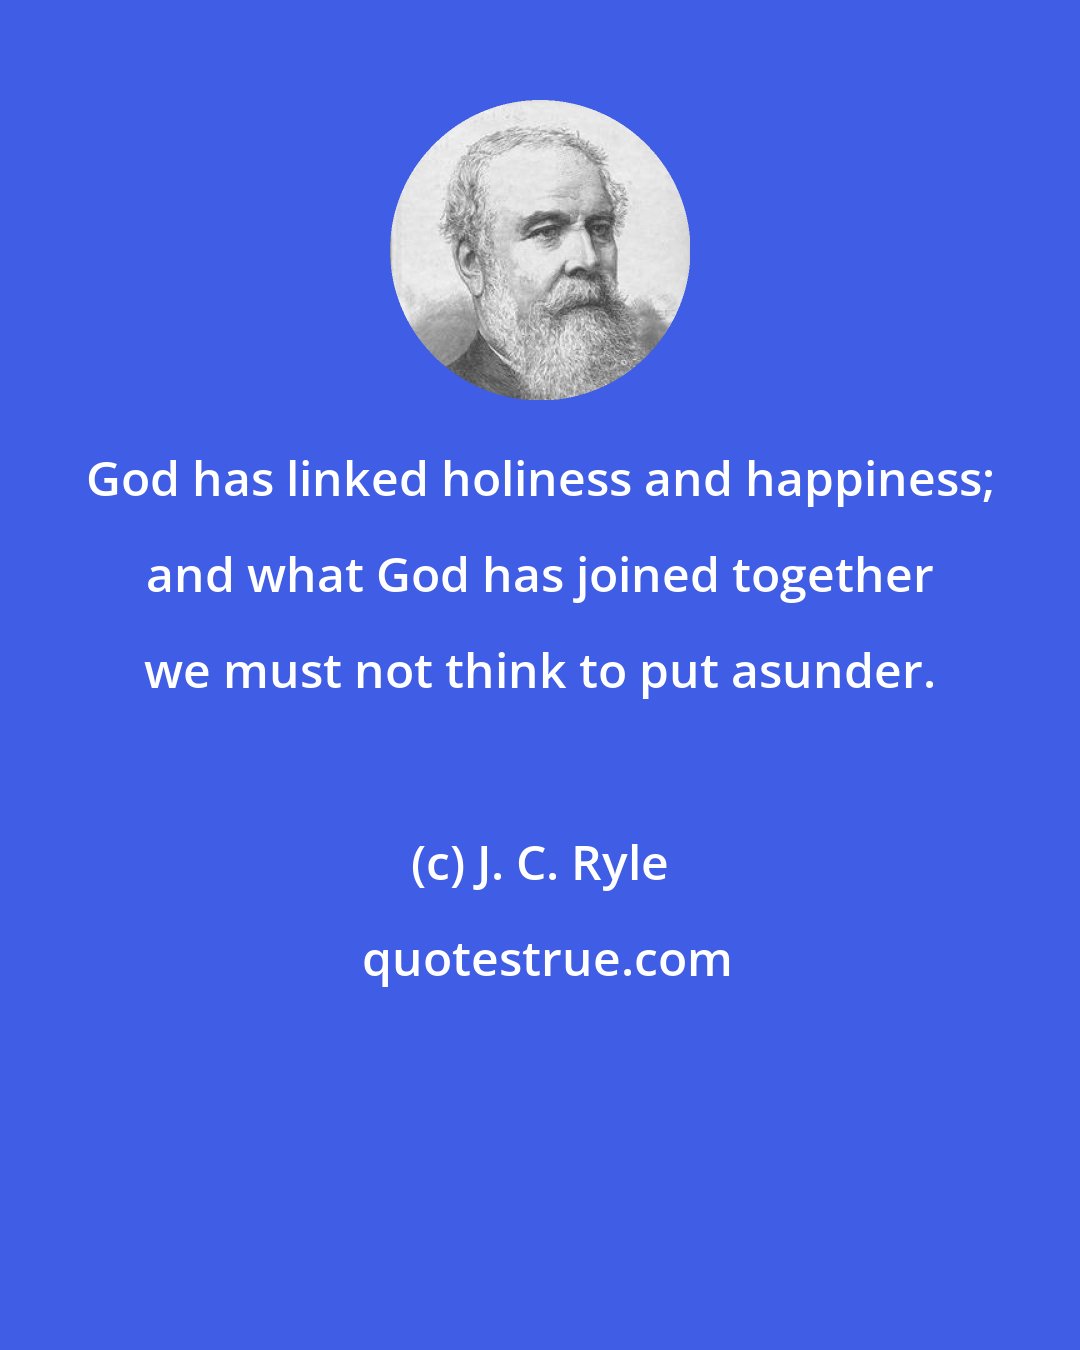 J. C. Ryle: God has linked holiness and happiness; and what God has joined together we must not think to put asunder.